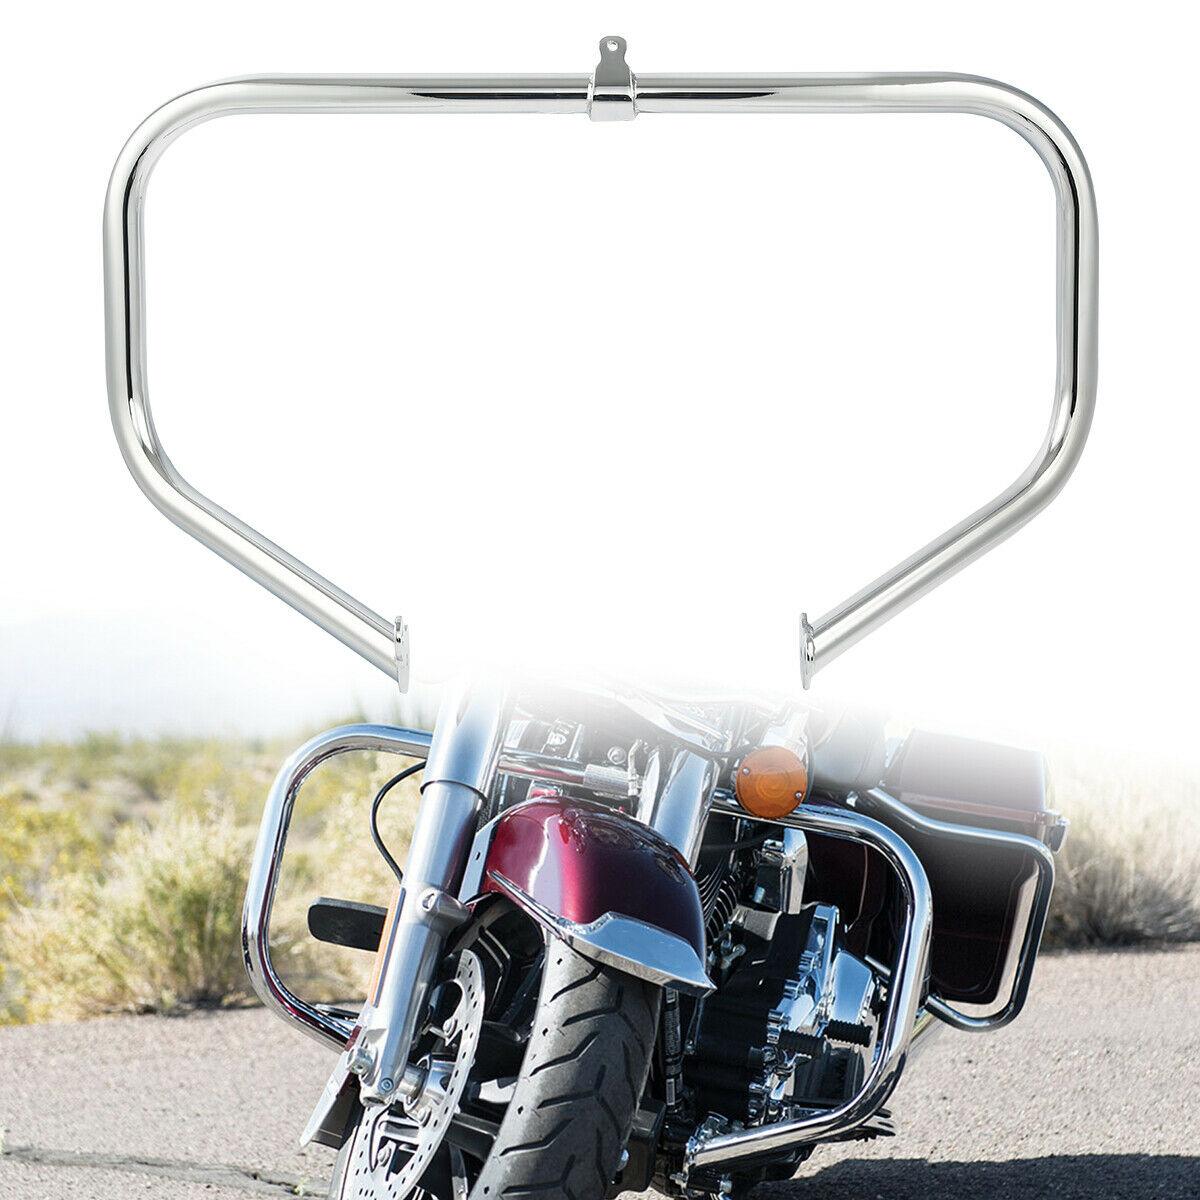 Highway Engine Crash Guard Bar For Harley Touring Street Glide Road King 09-20 - Moto Life Products